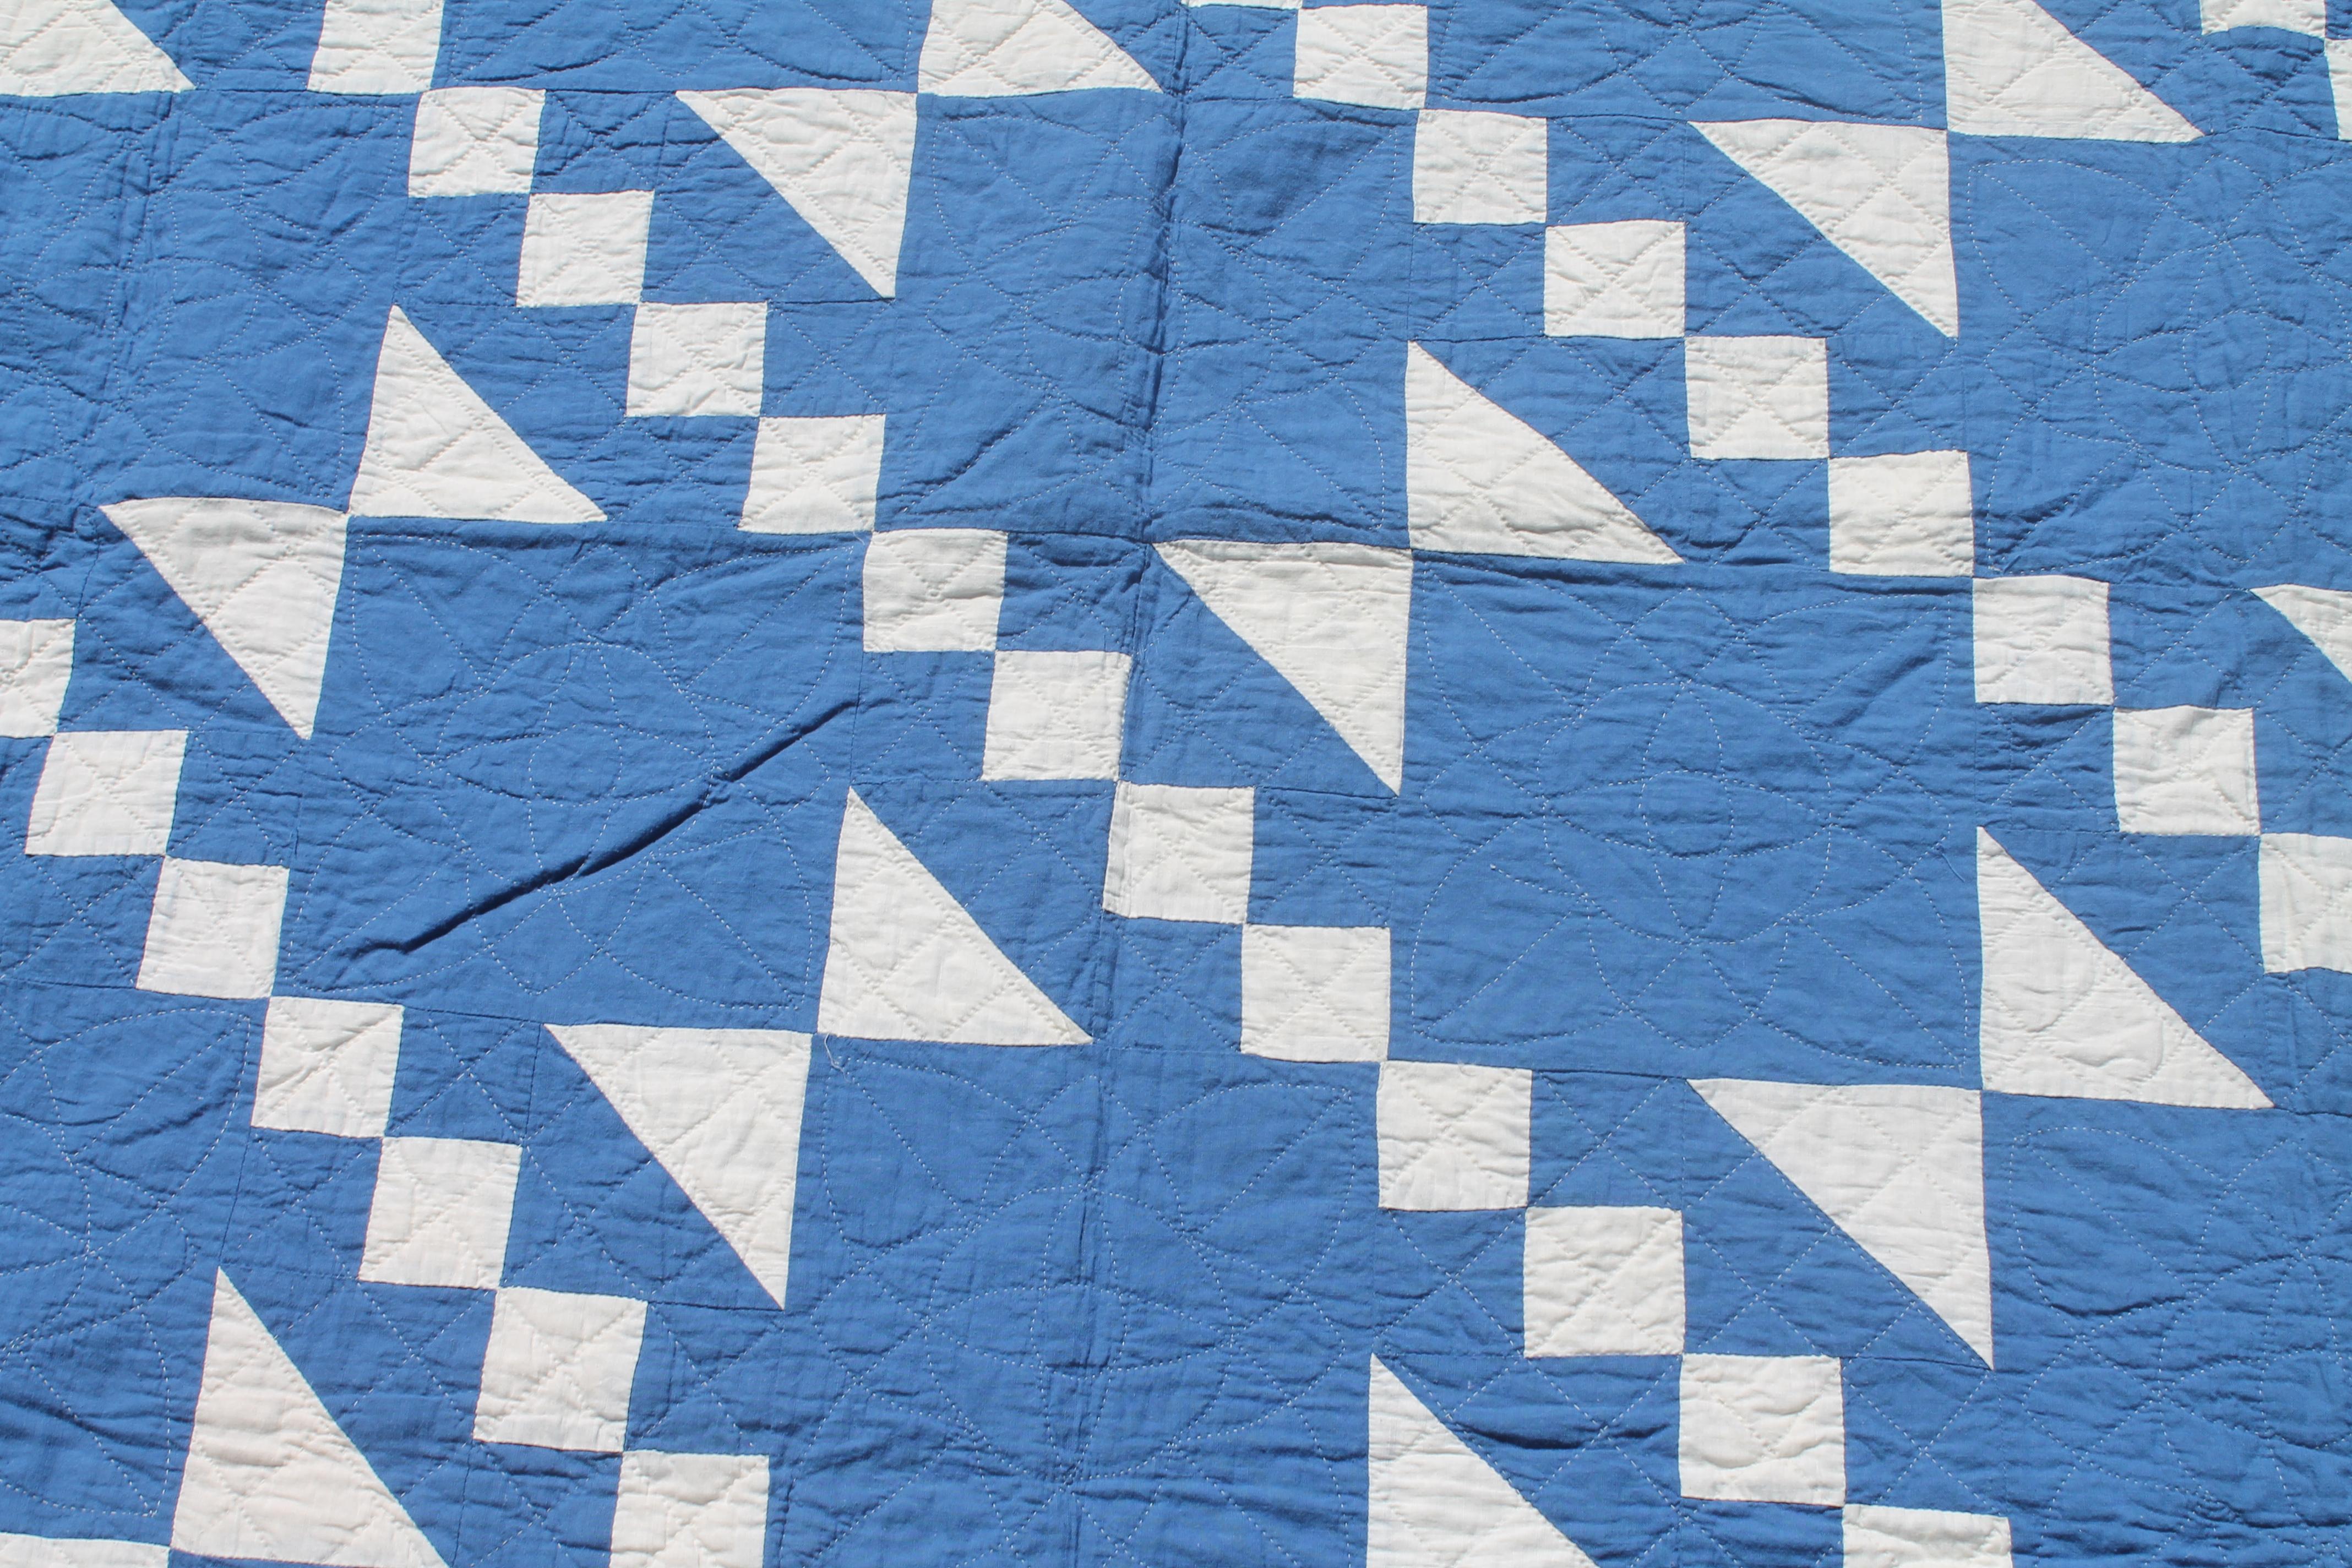 American Antique Quilt-French Blue and White Geometric Quilt